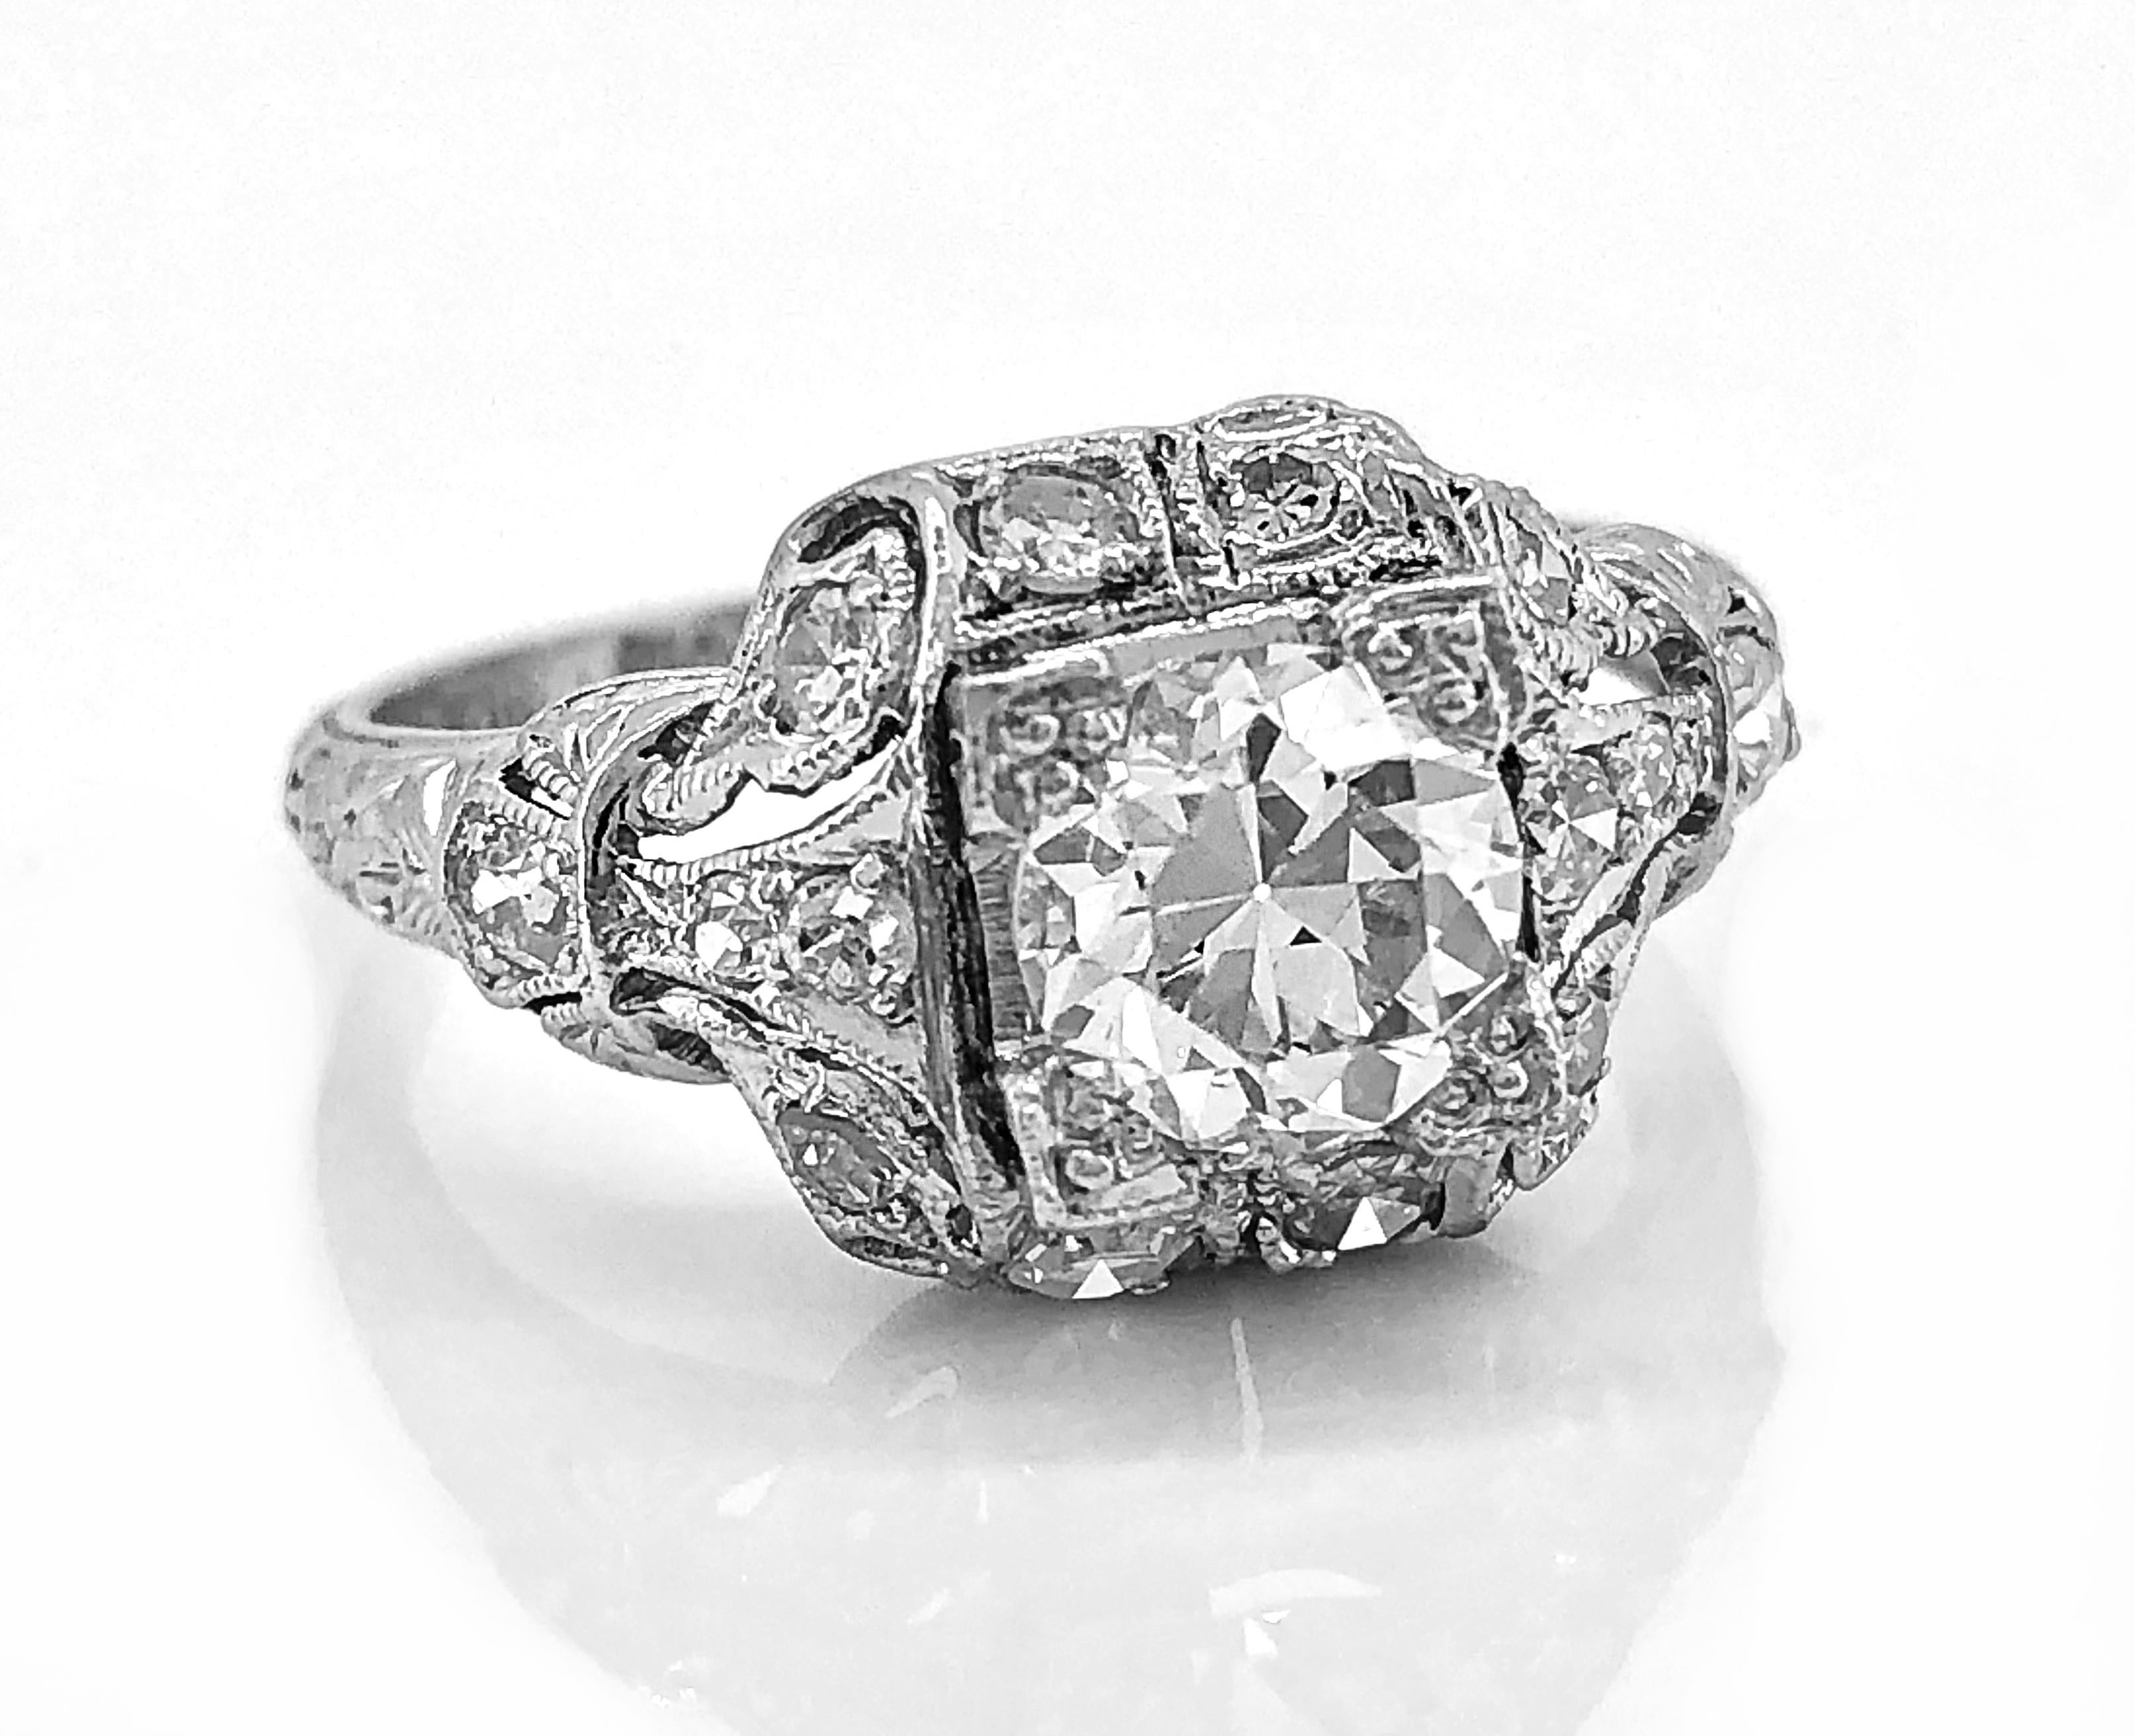 Another fantastic high quality antique engagement ring. It features an exceptional European cut center diamond with VS1 clarity and F-G color. This ring is artistically crafted and truly one-of-a-kind!

Primary Stone(s): Diamond - Conflict